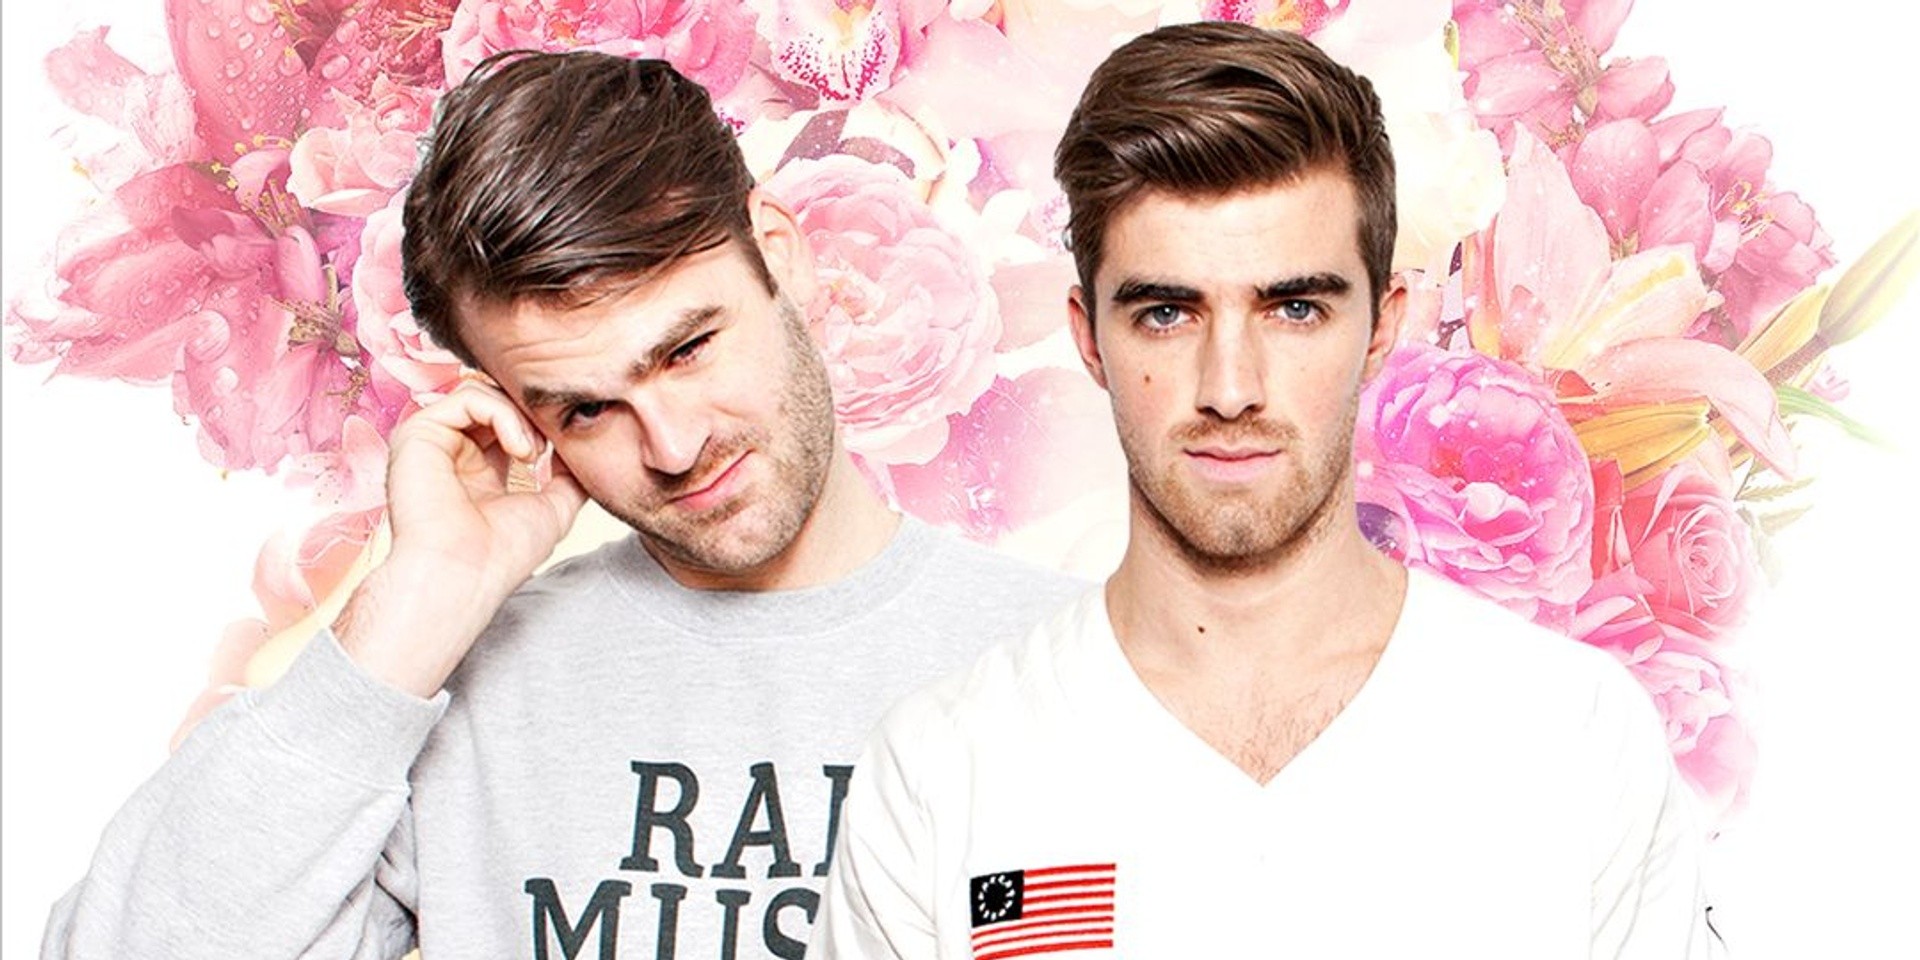 The Chainsmokers cracked a stupid, racist joke in China